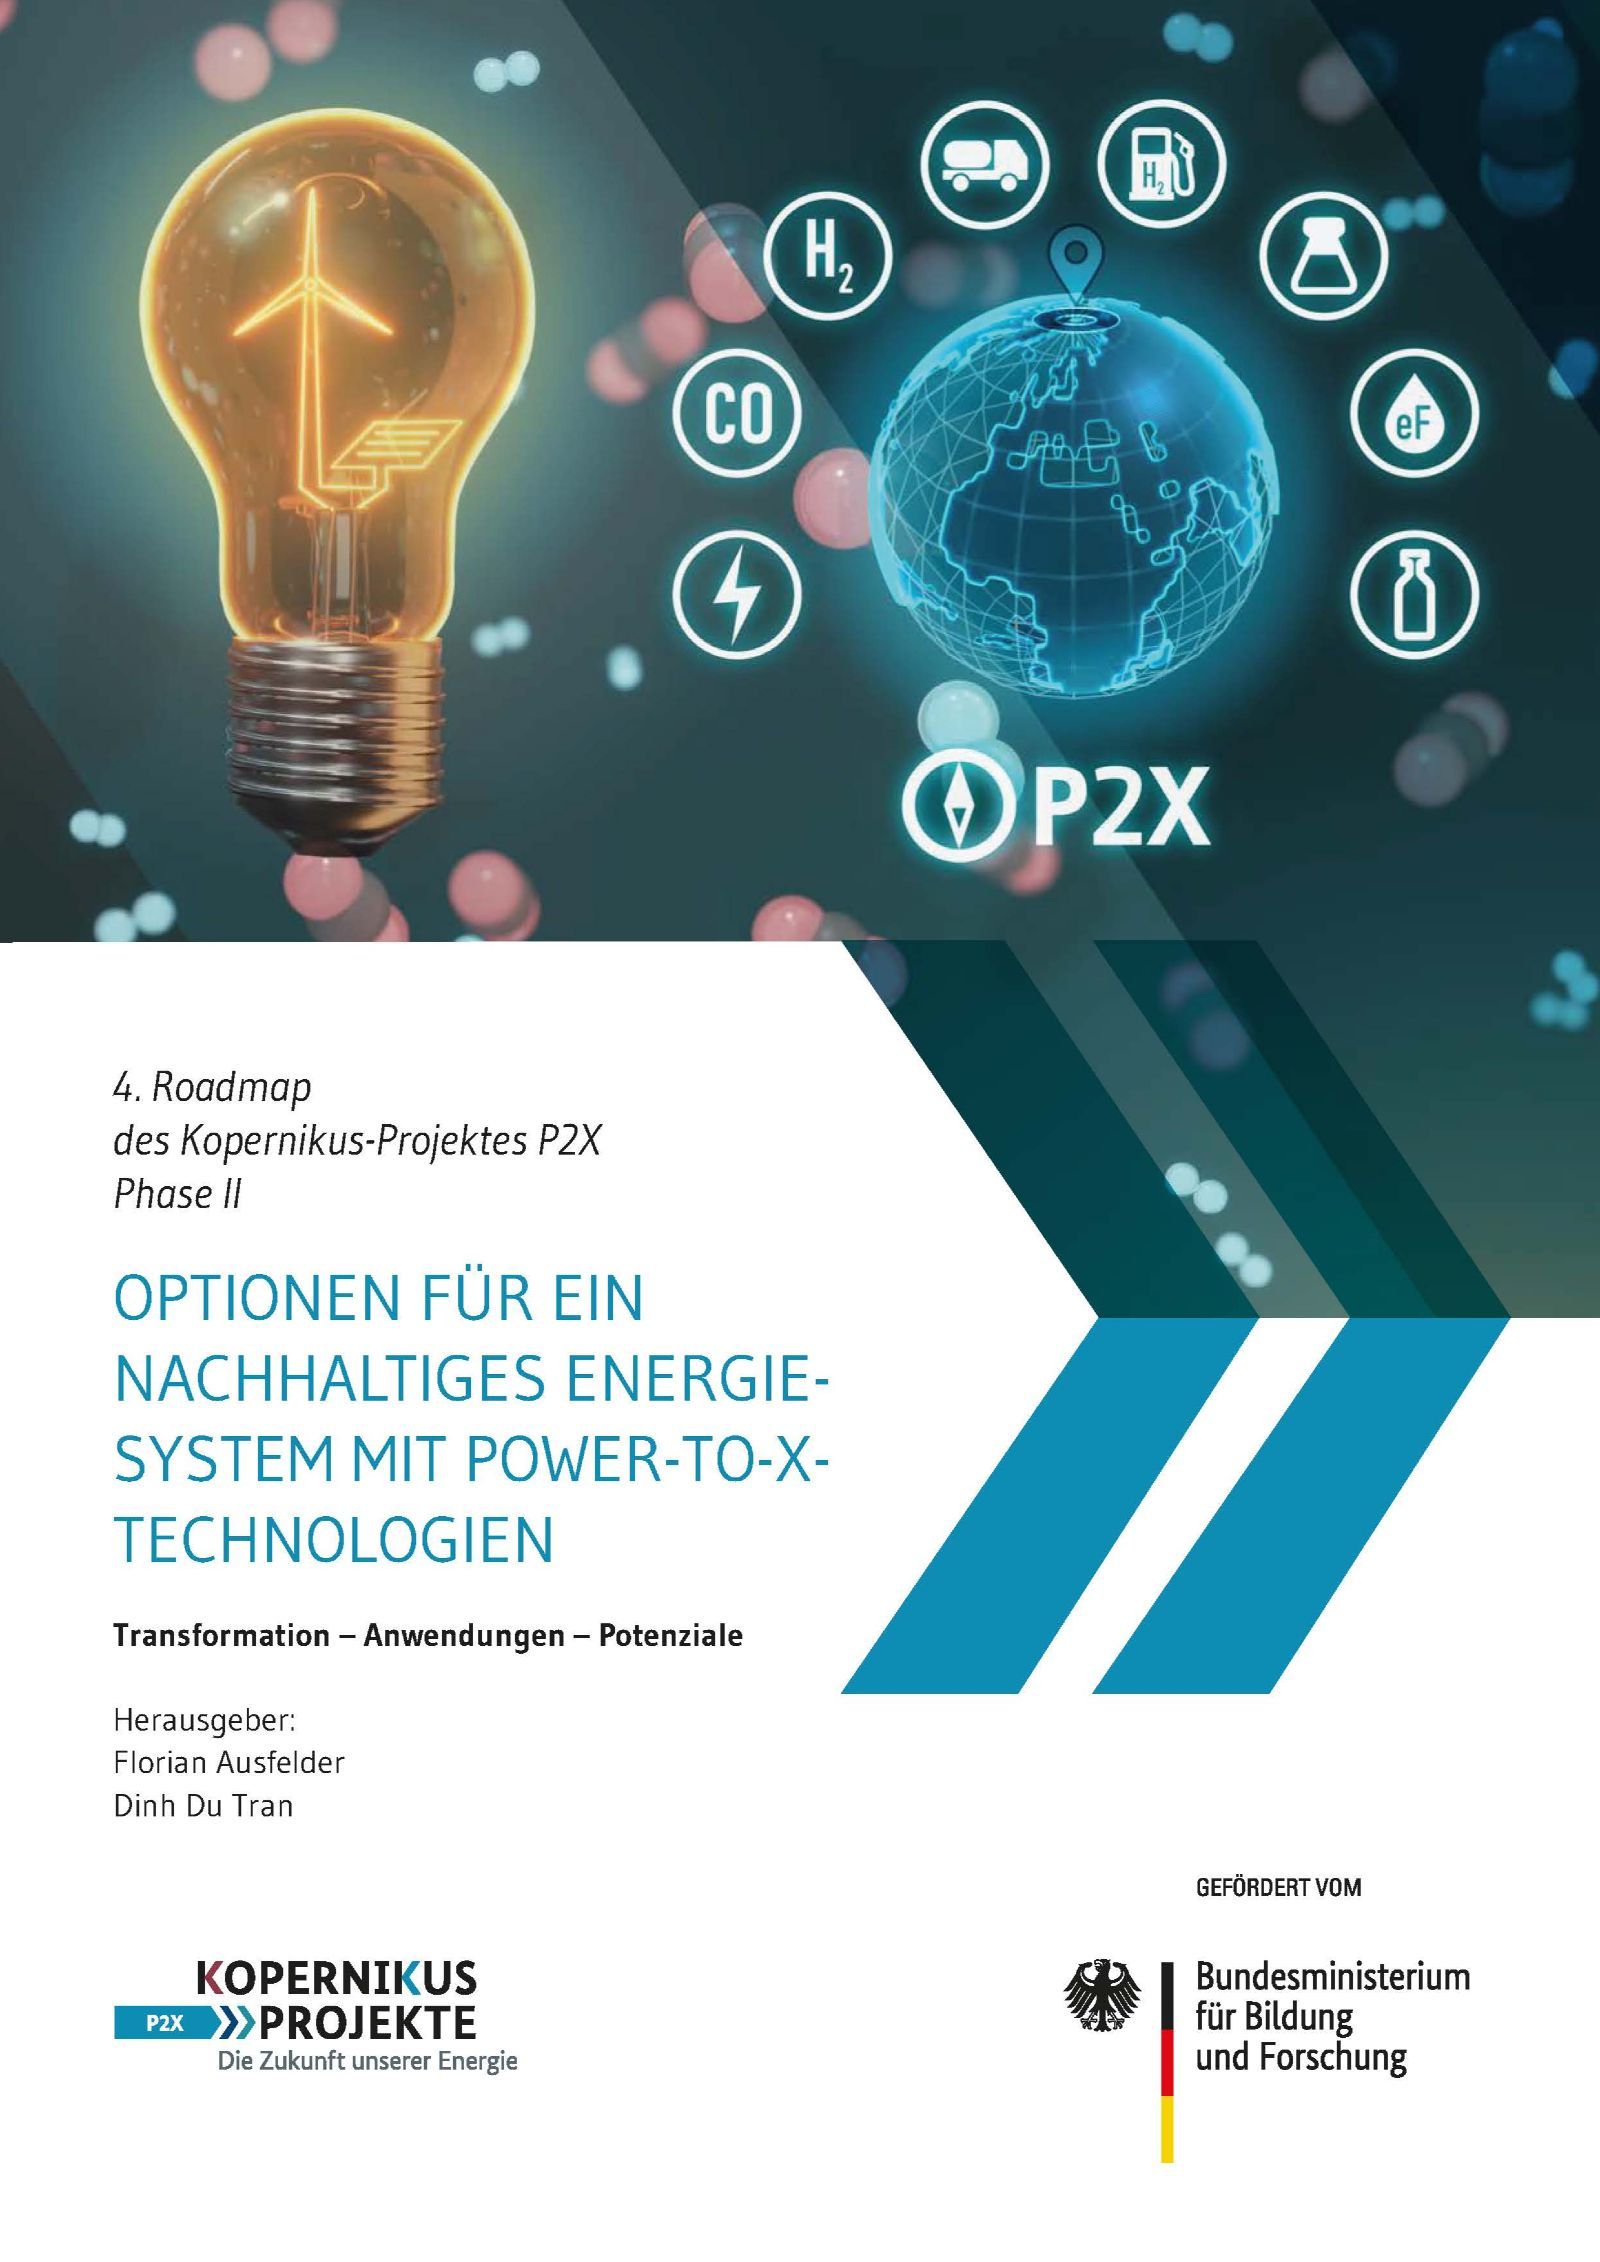 The image shows the cover page of the fourth P2X roadmap. 